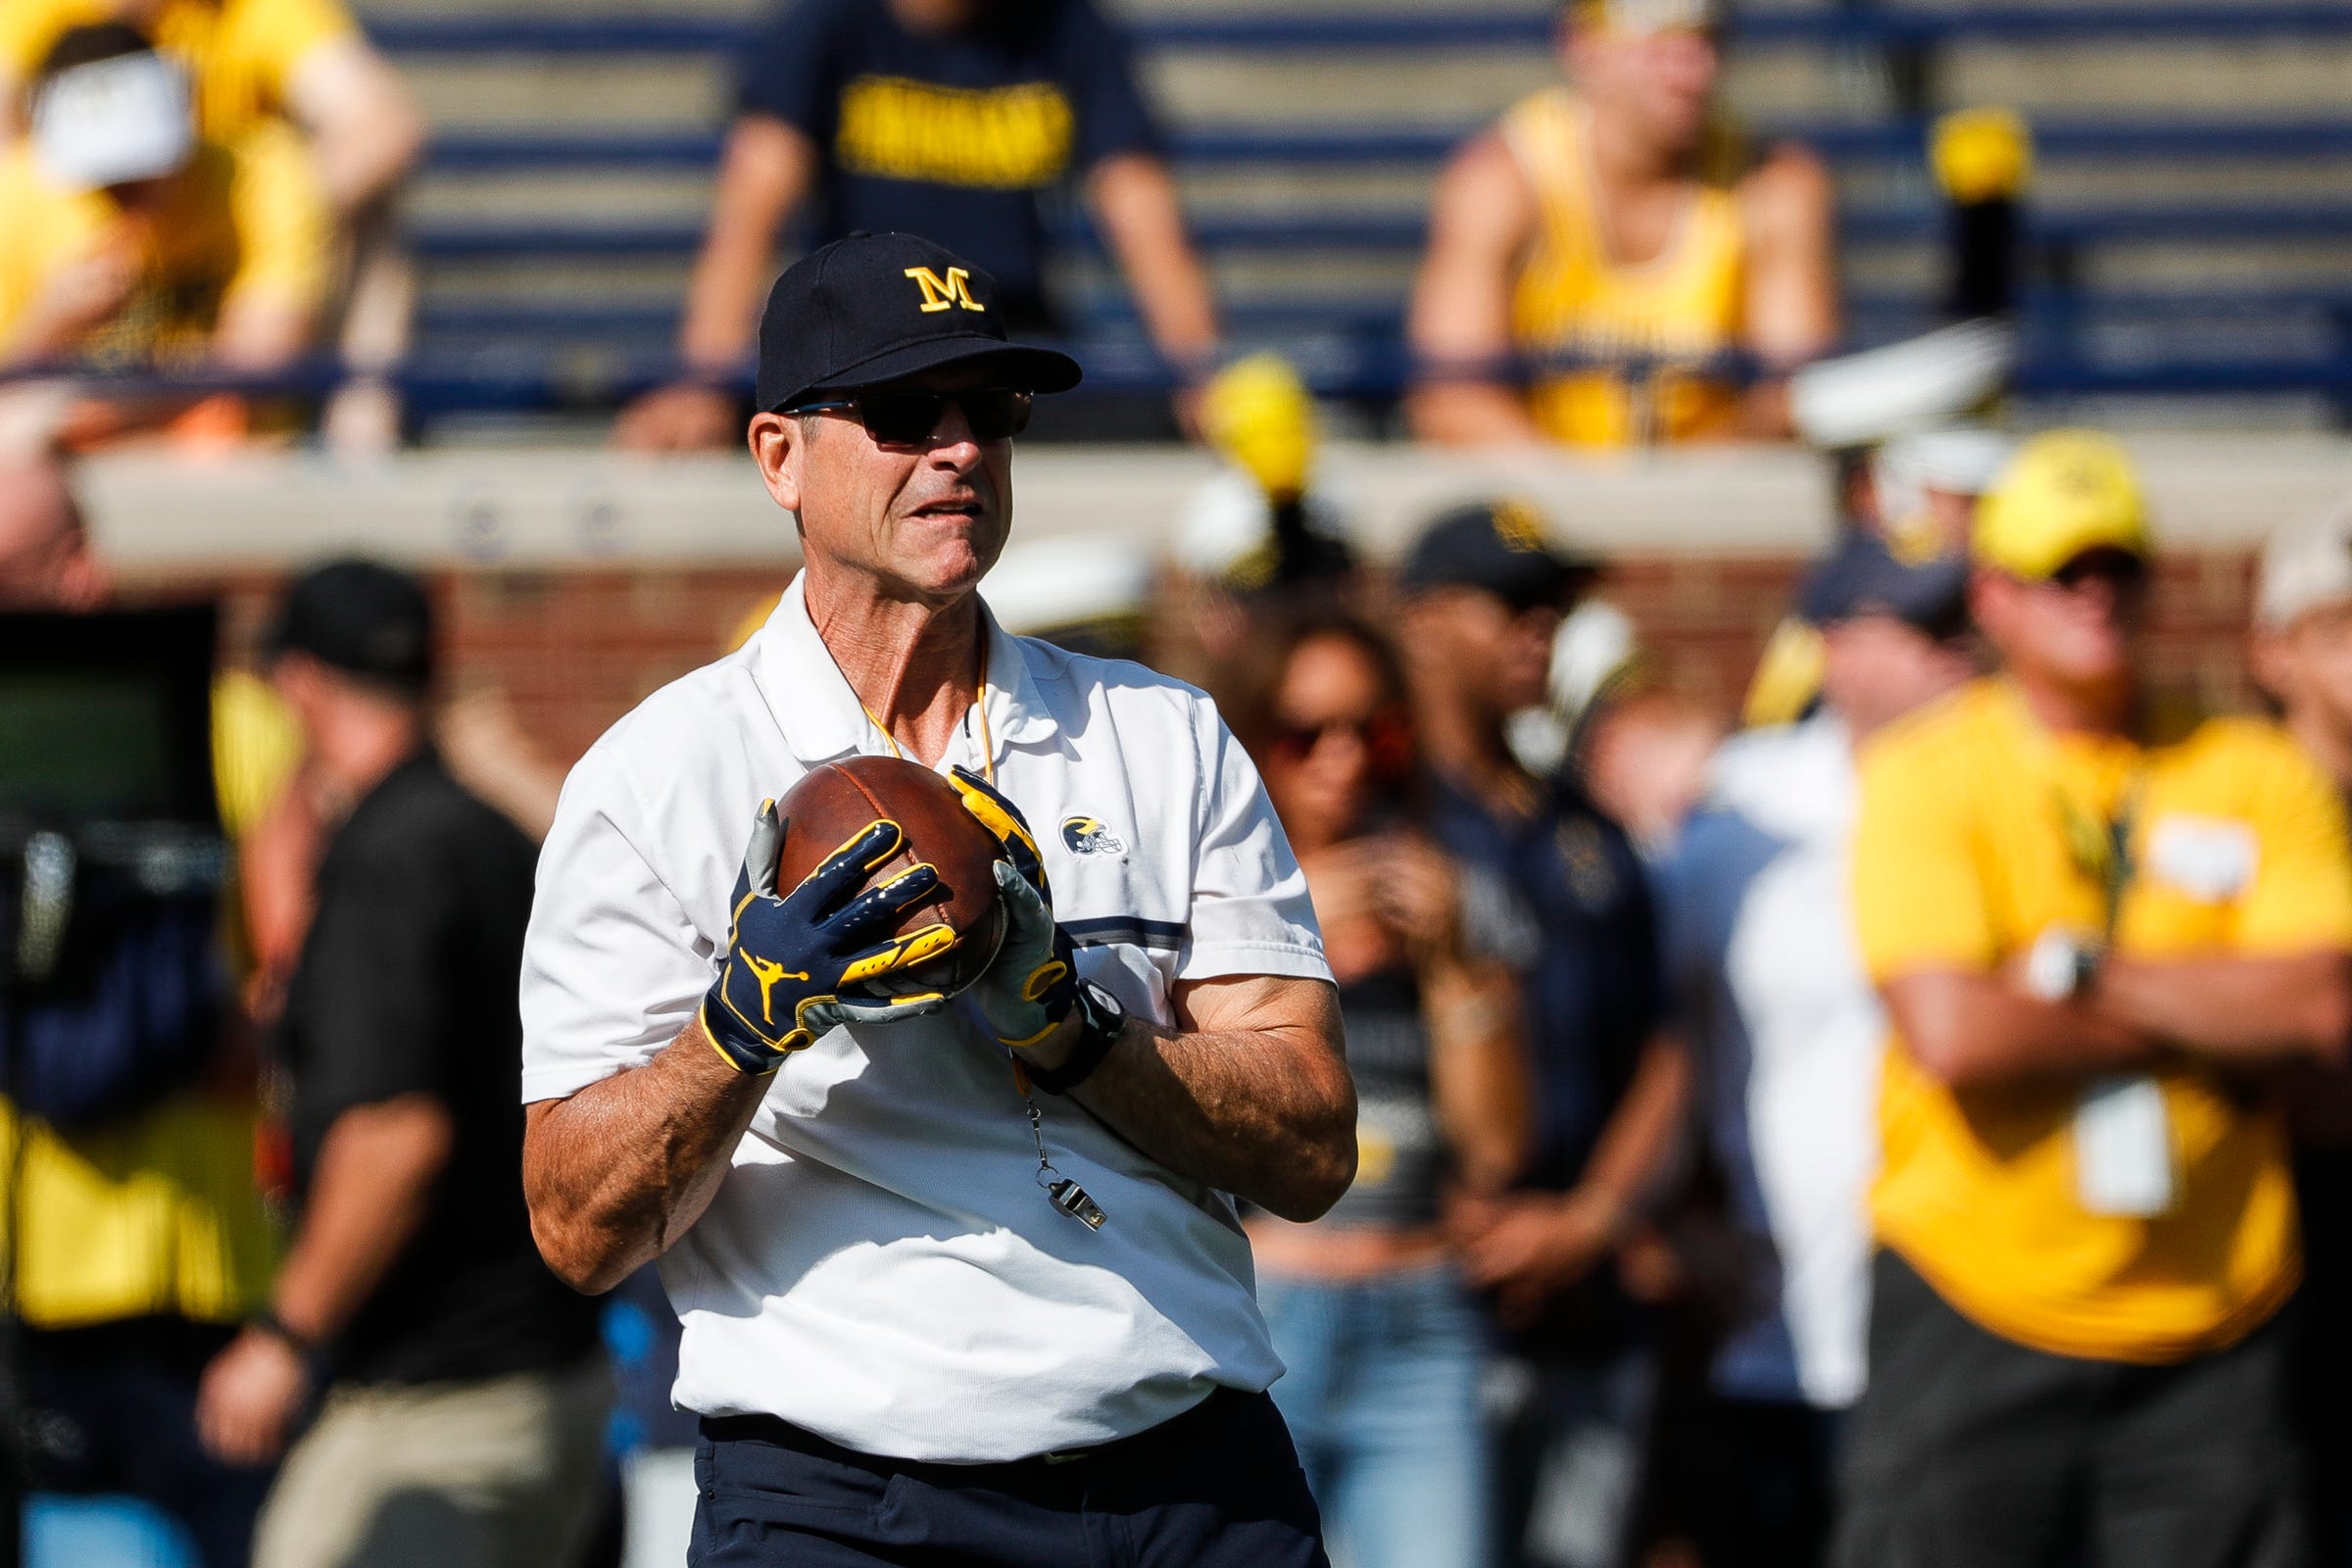 Harbaugh's hot seat has noticeably cooled off this week